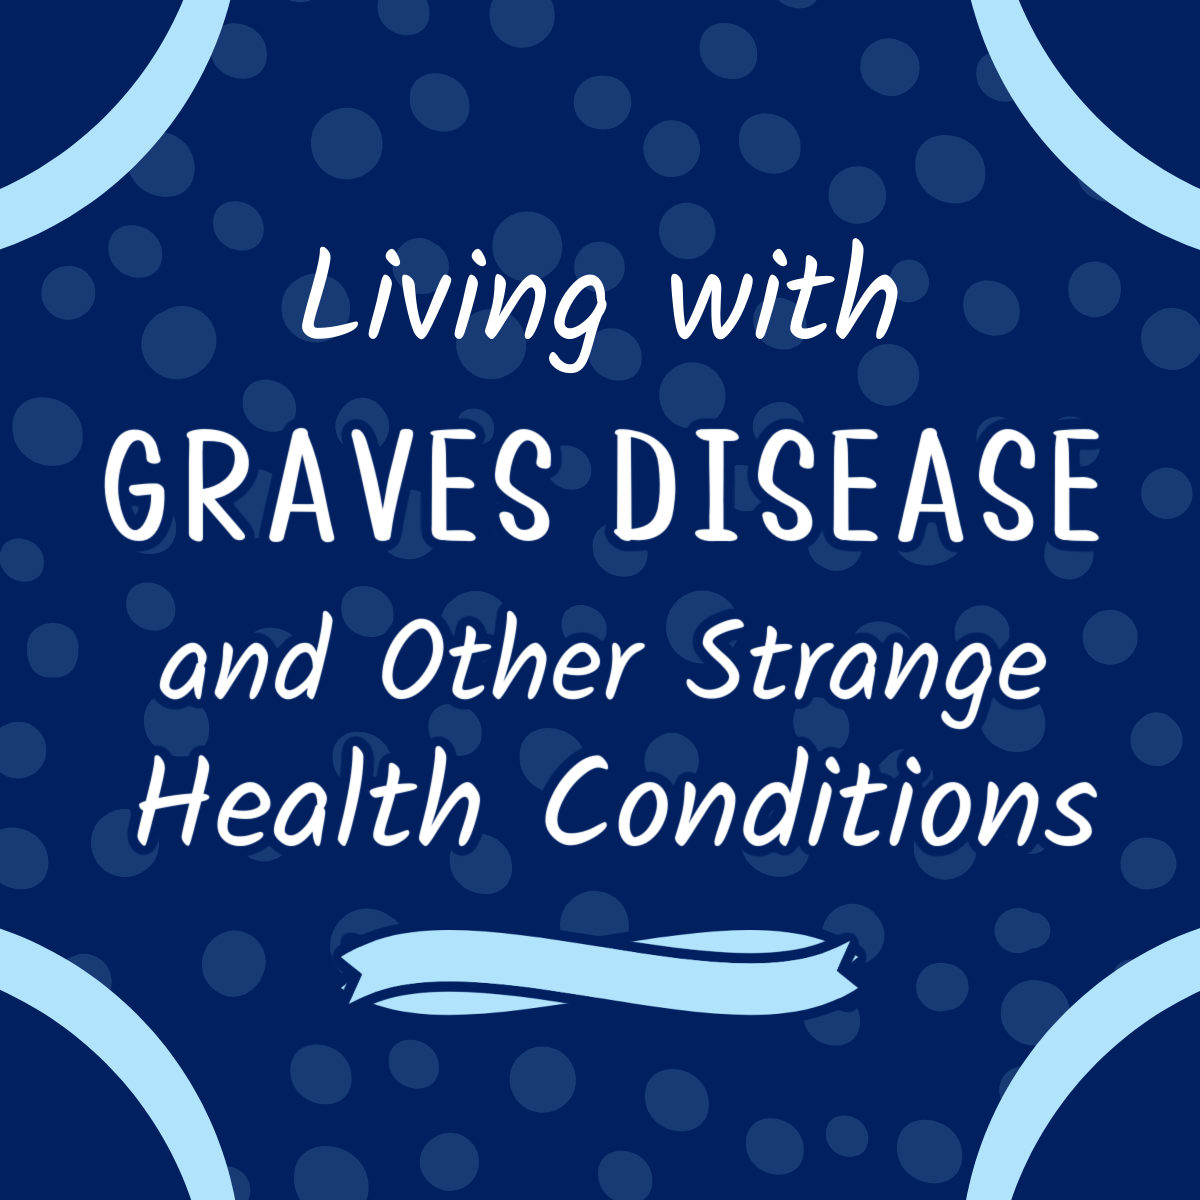 Living with Graves Disease and Other Strange Health Conditions